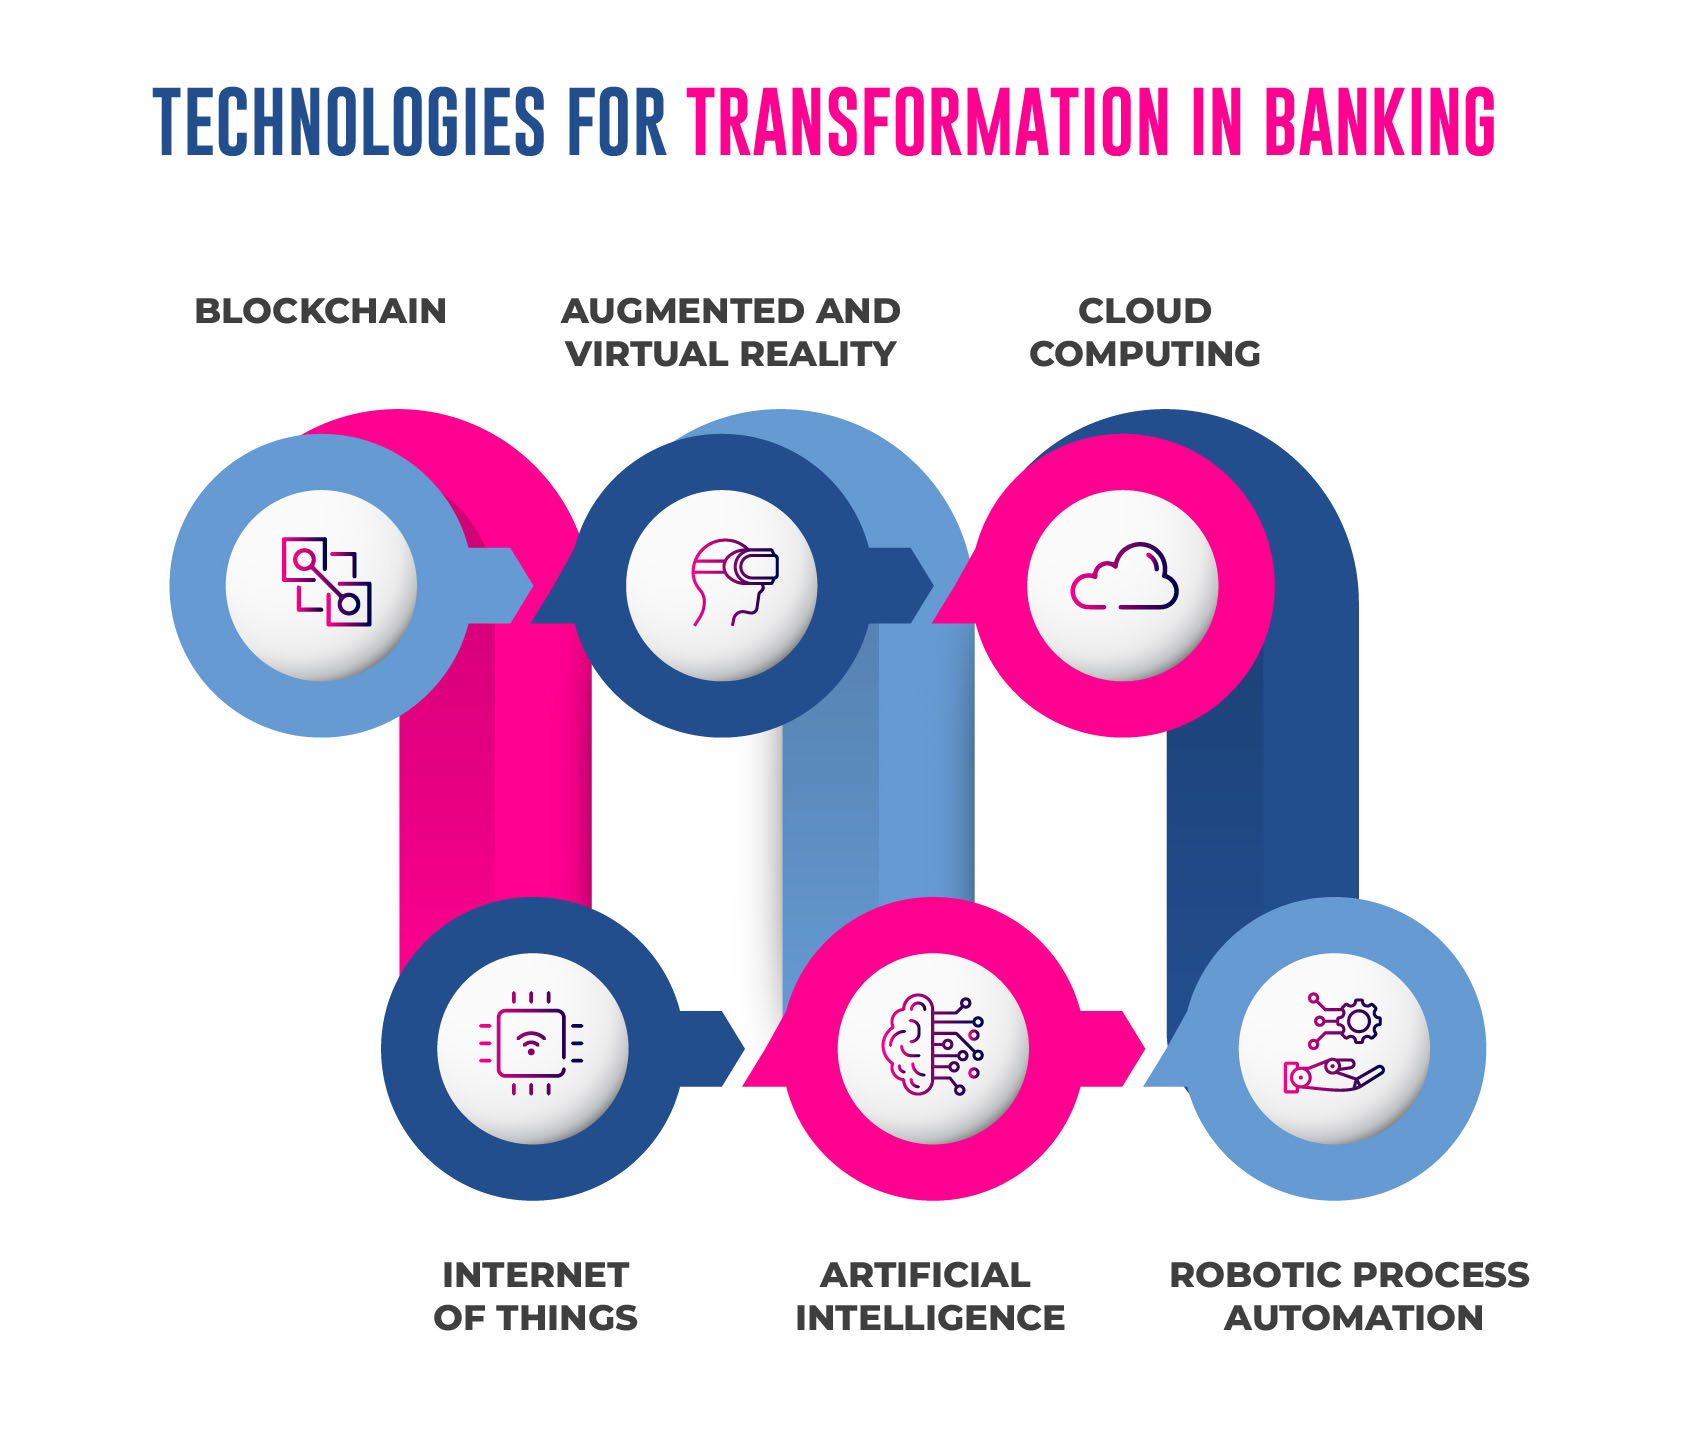 Technologies for Transformation in Banking